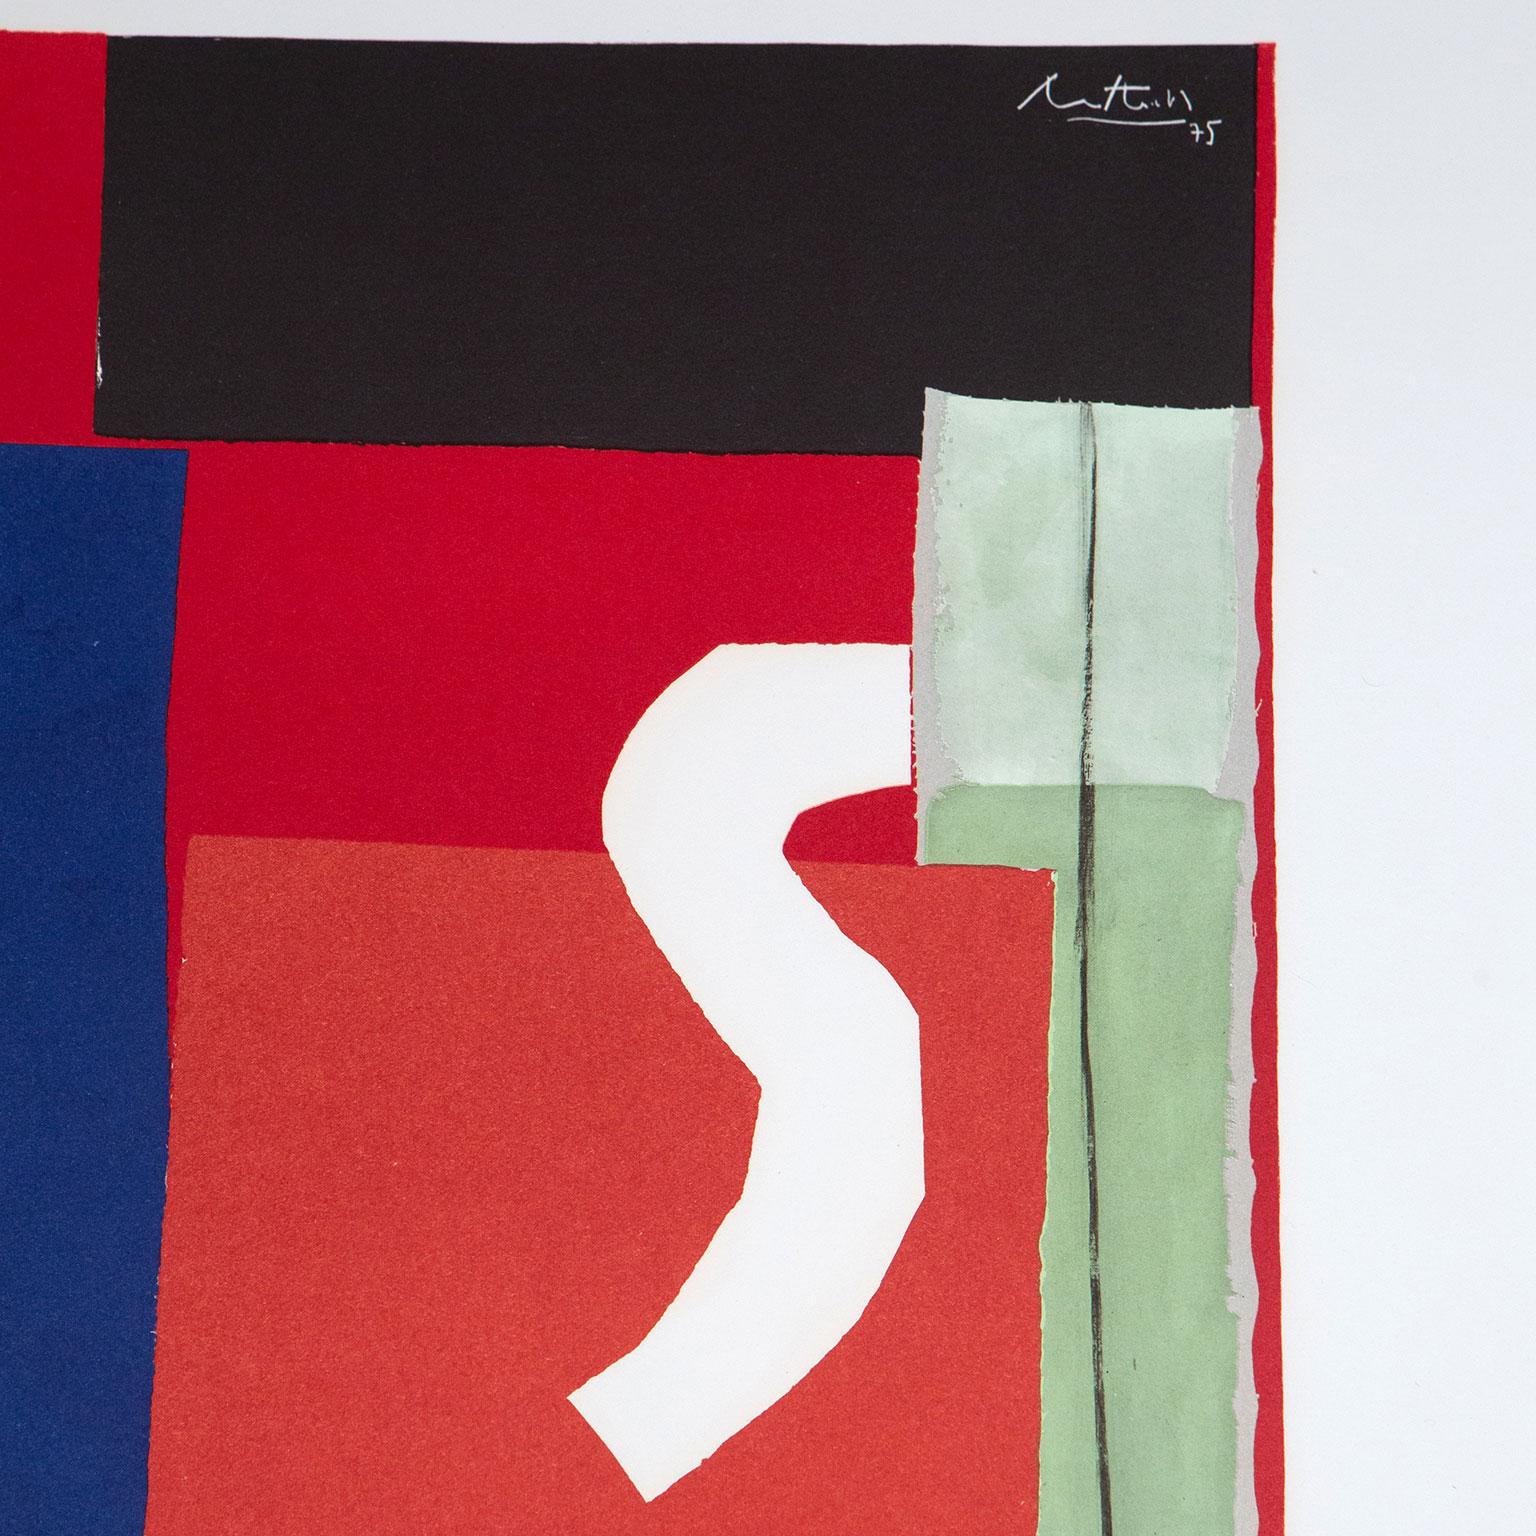 In Celebration - Red Abstract Print by Robert Motherwell